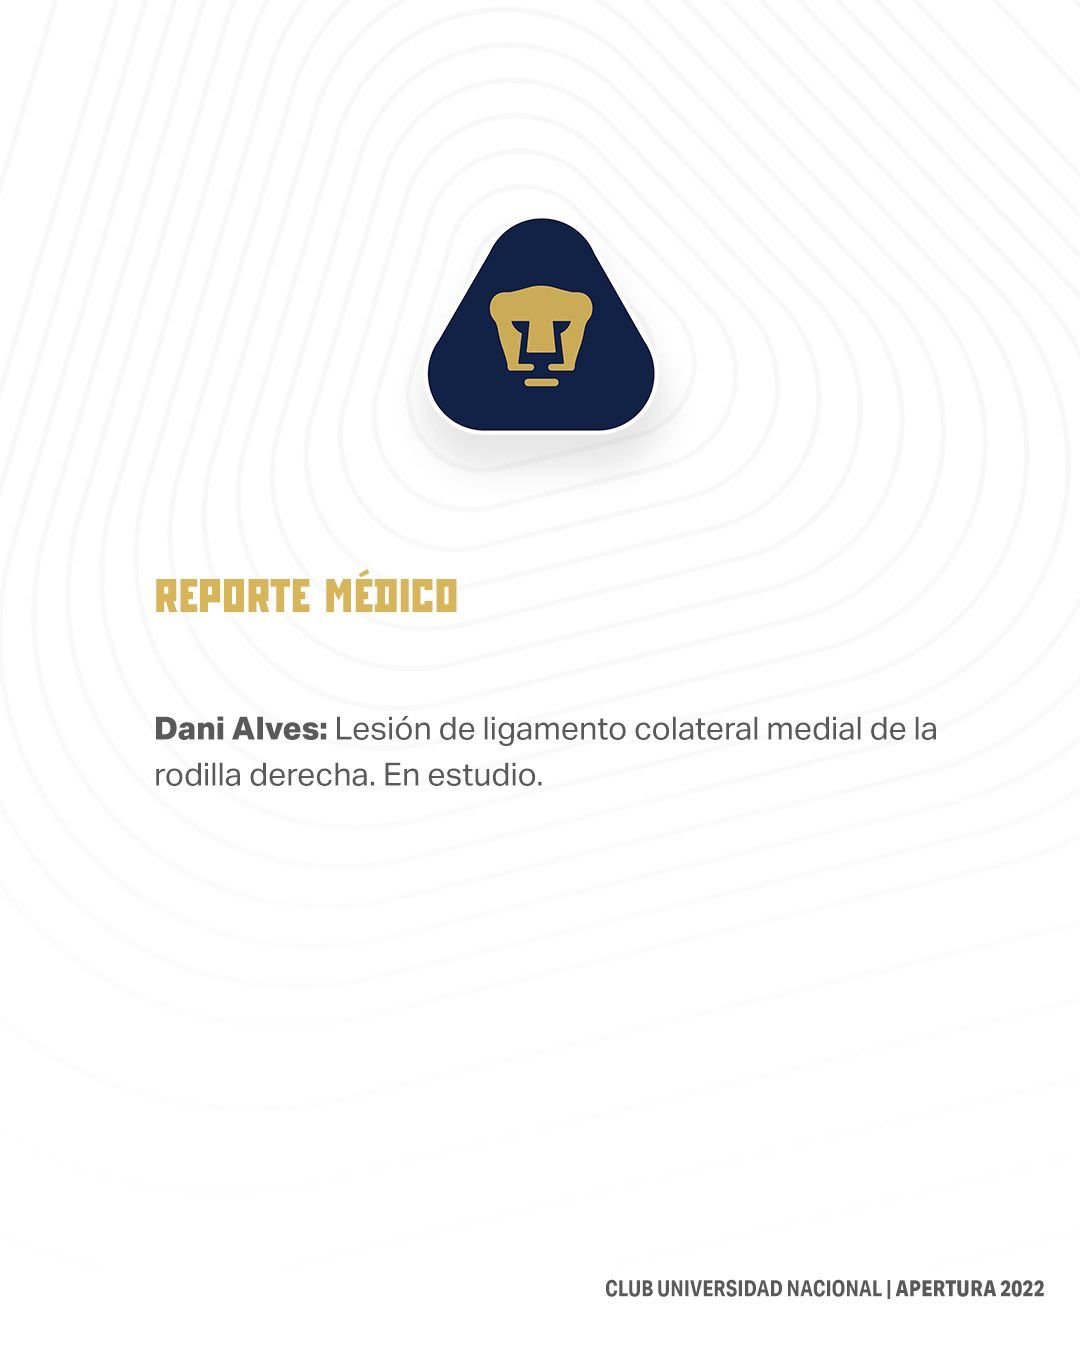 The team confirmed Dani Alves' injury without disclosing more details (Photo: Twitter/@PumasMX)